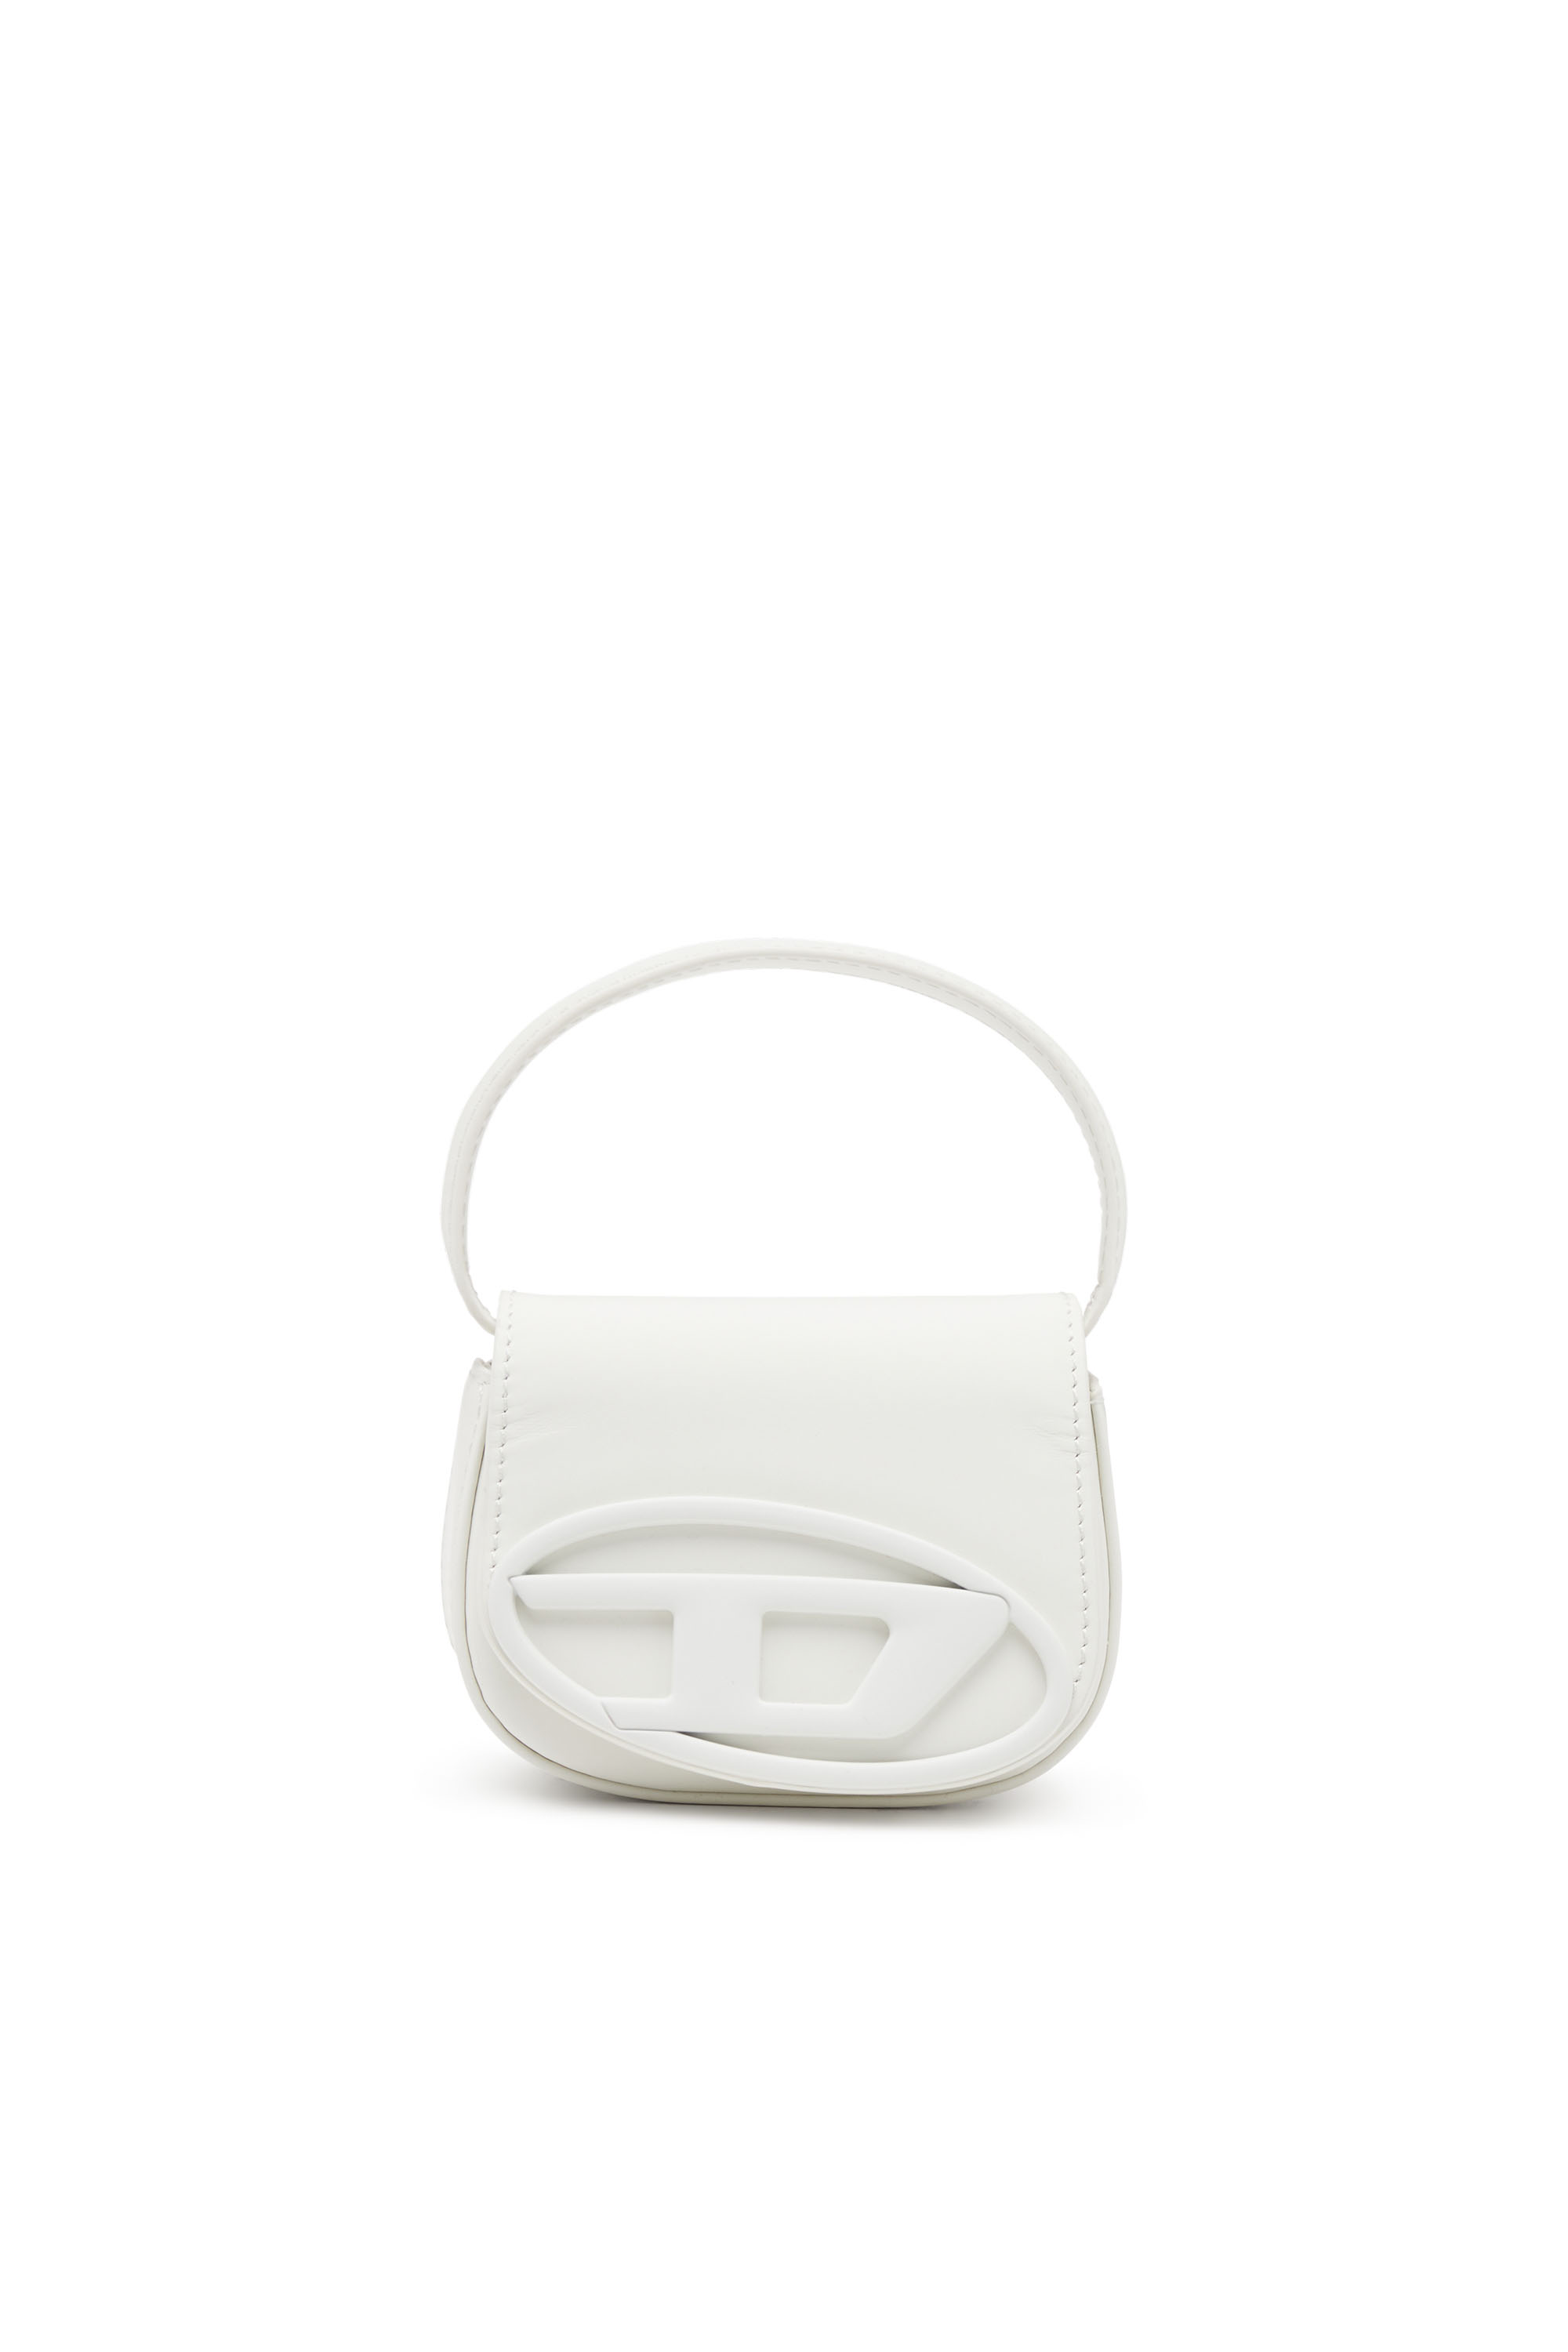 Diesel - 1DR XS, Woman 1DR Xs-Iconic mini bag in matte leather in White - Image 6